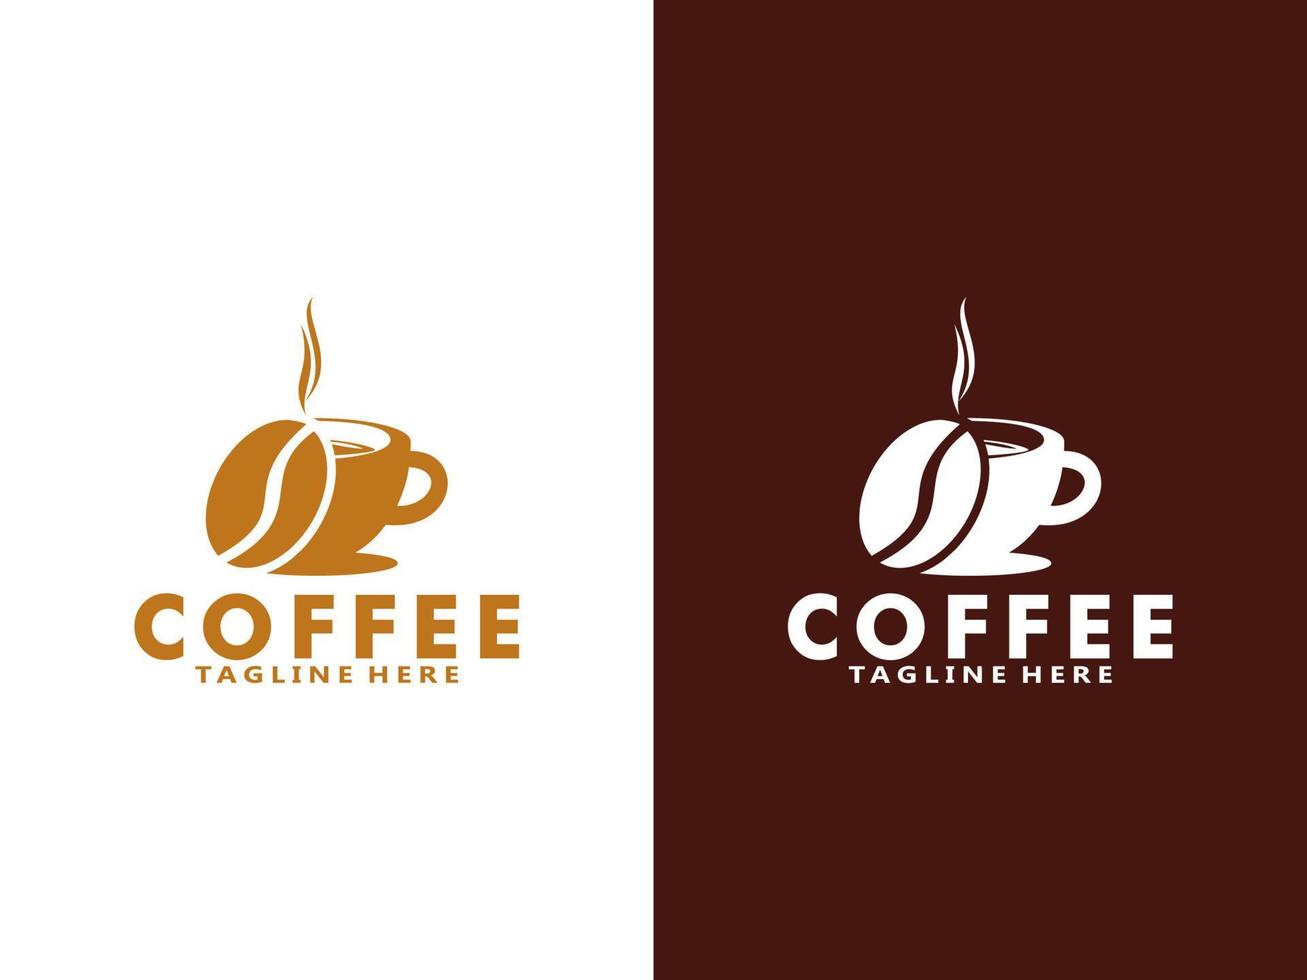 Coffee logo design template, Vector coffee logo for coffee shop and any business related to coffee.